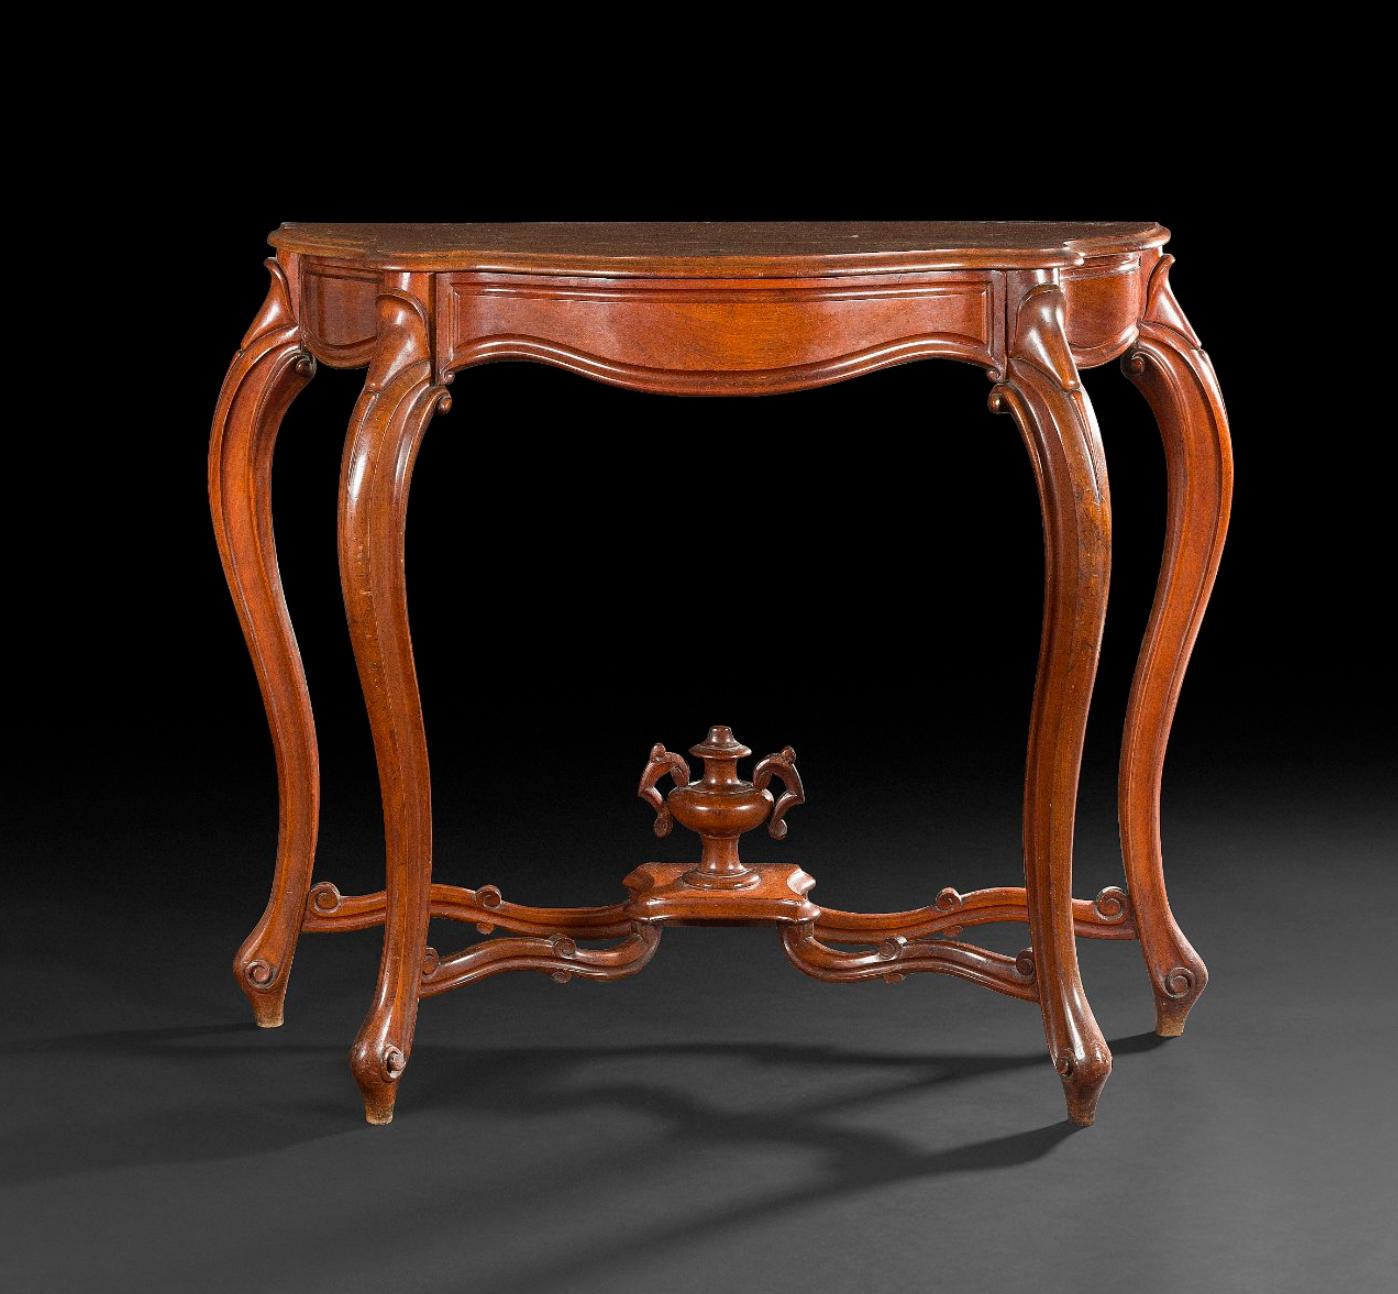 Mahogany console molded and carved form of movement, opening to one drawer, resting on arched legs joined by a spacer surmounted by a vase.
France, circa 1880.